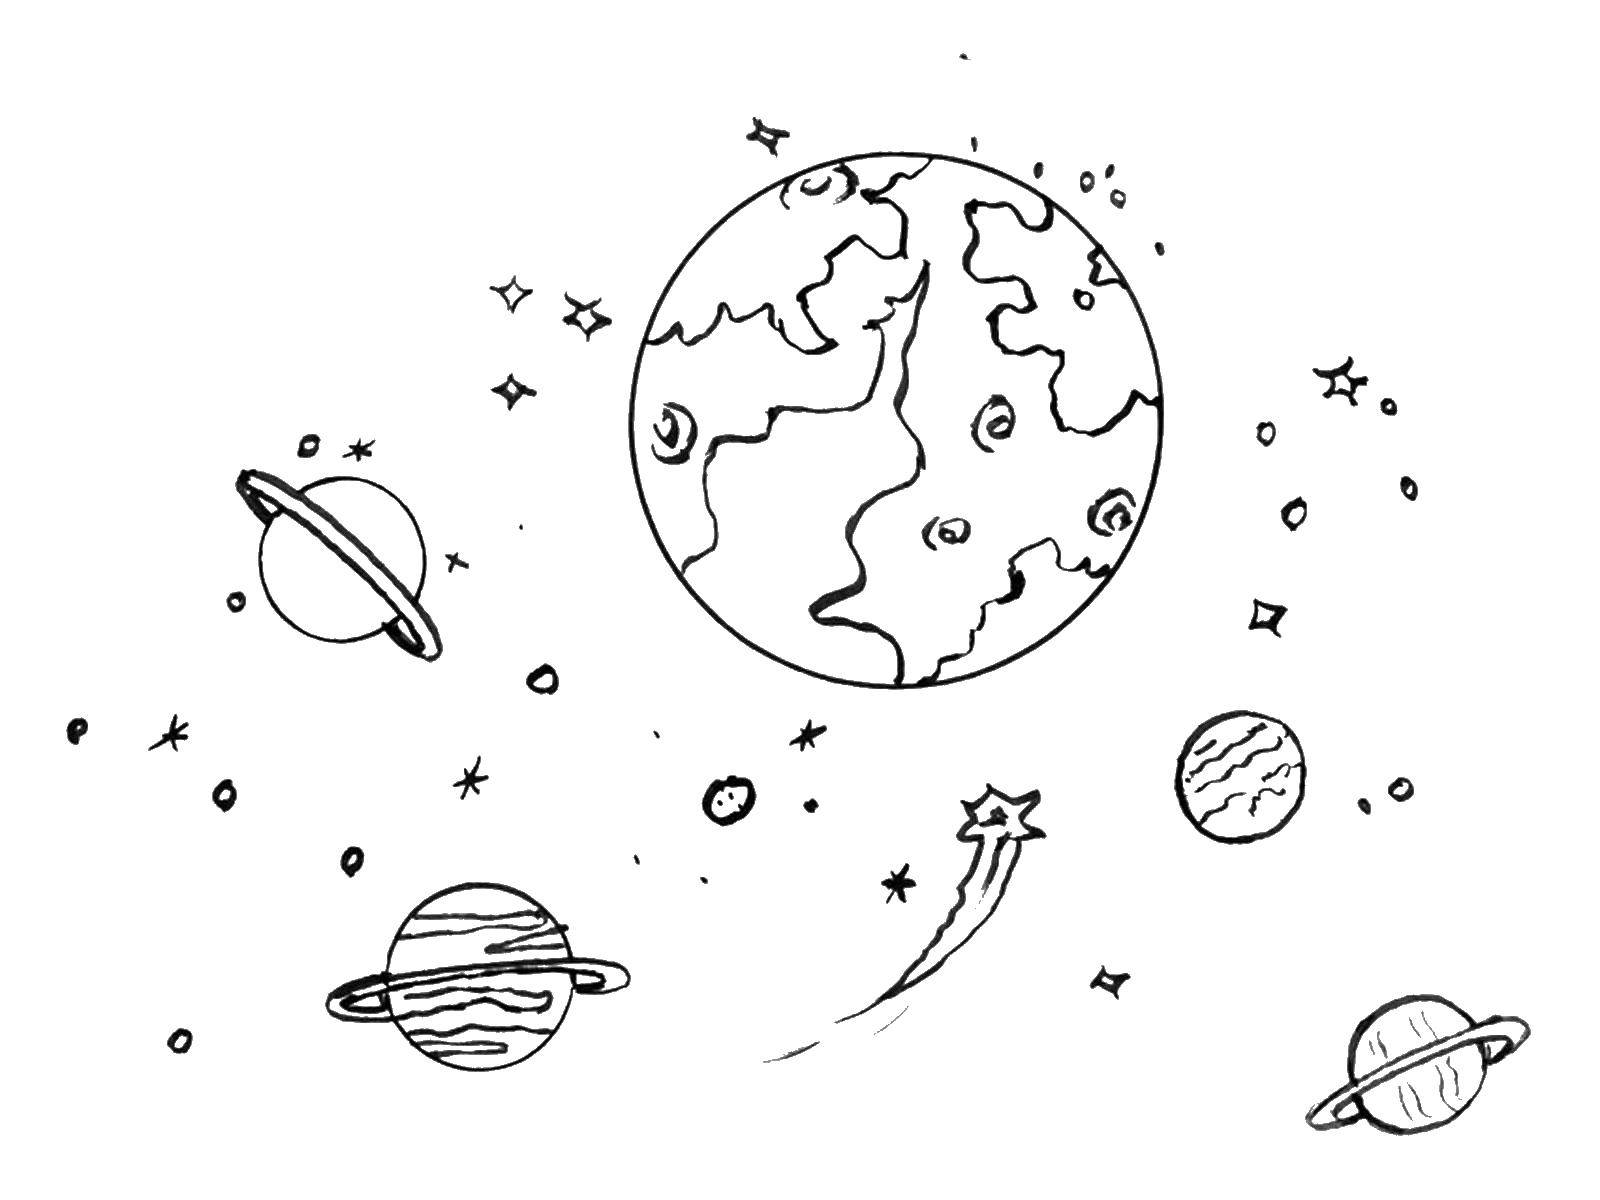 Coloring Space landscape. Category Space coloring pages. Tags:  Space, planet, universe, Galaxy.